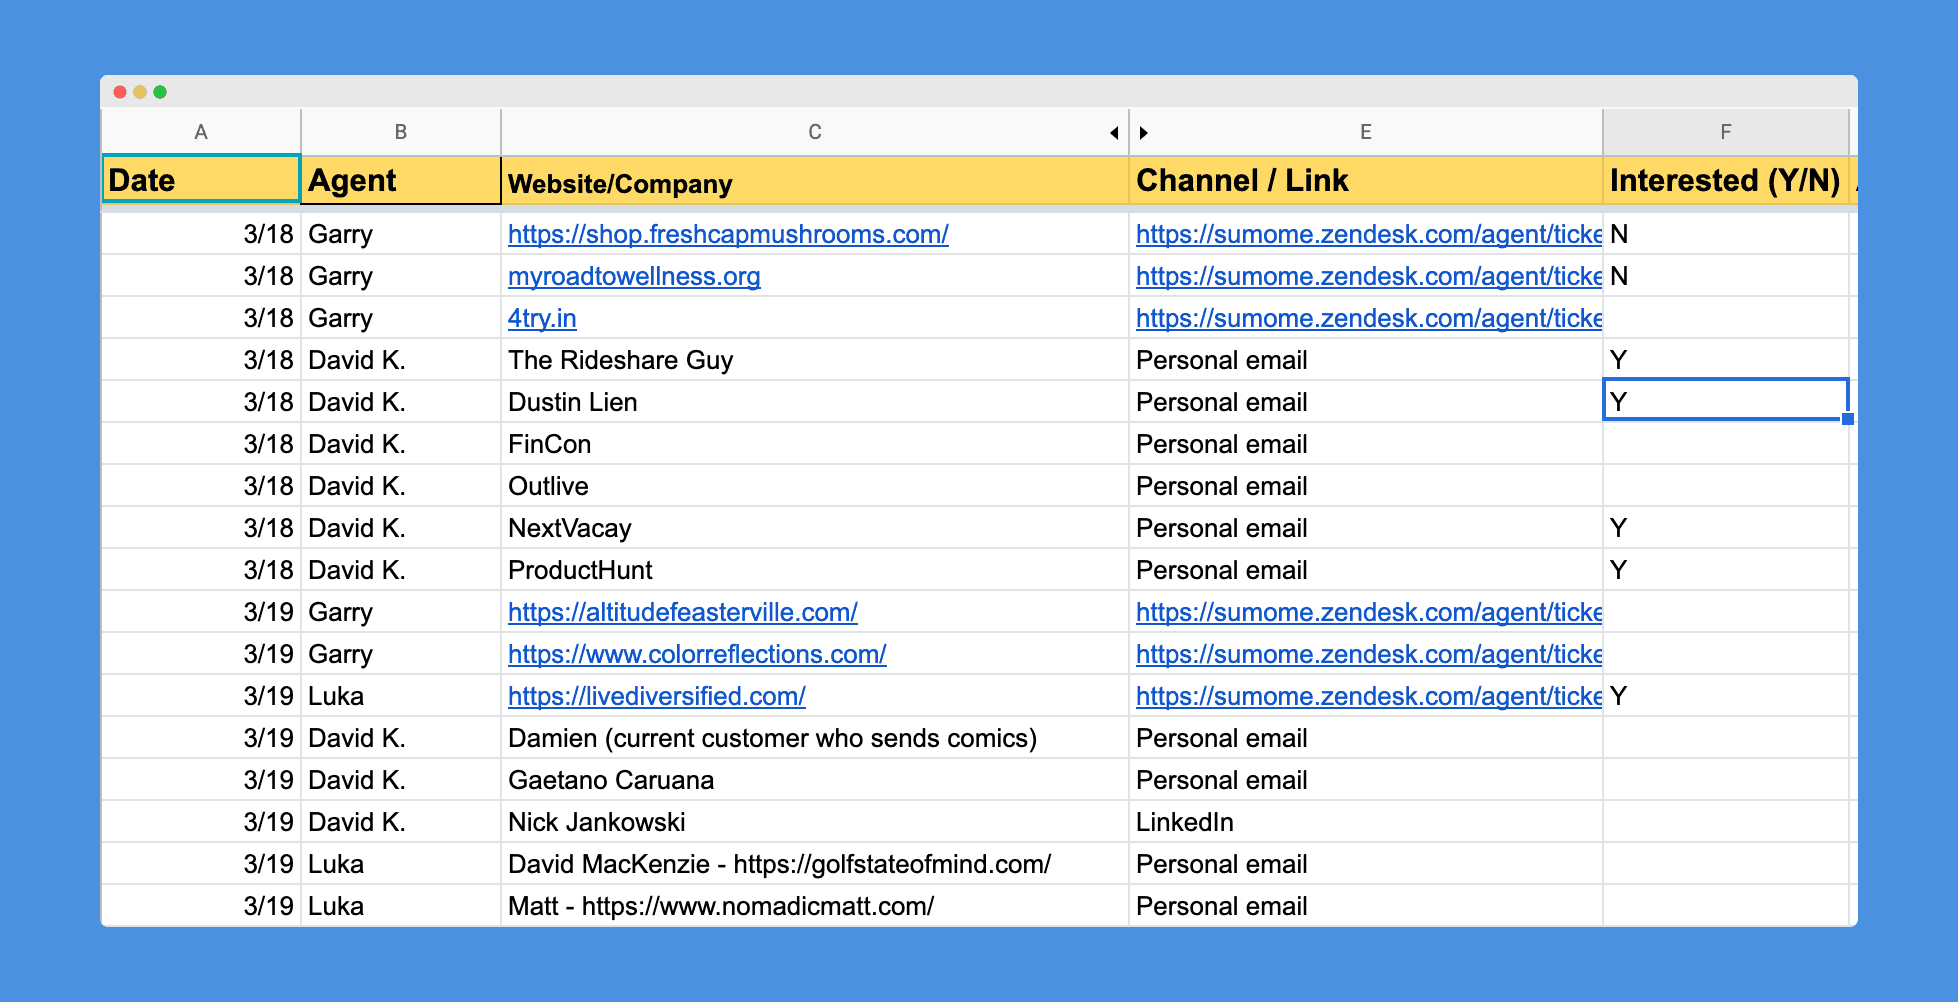 Our outreach spreadsheet to potential customers and influencers.